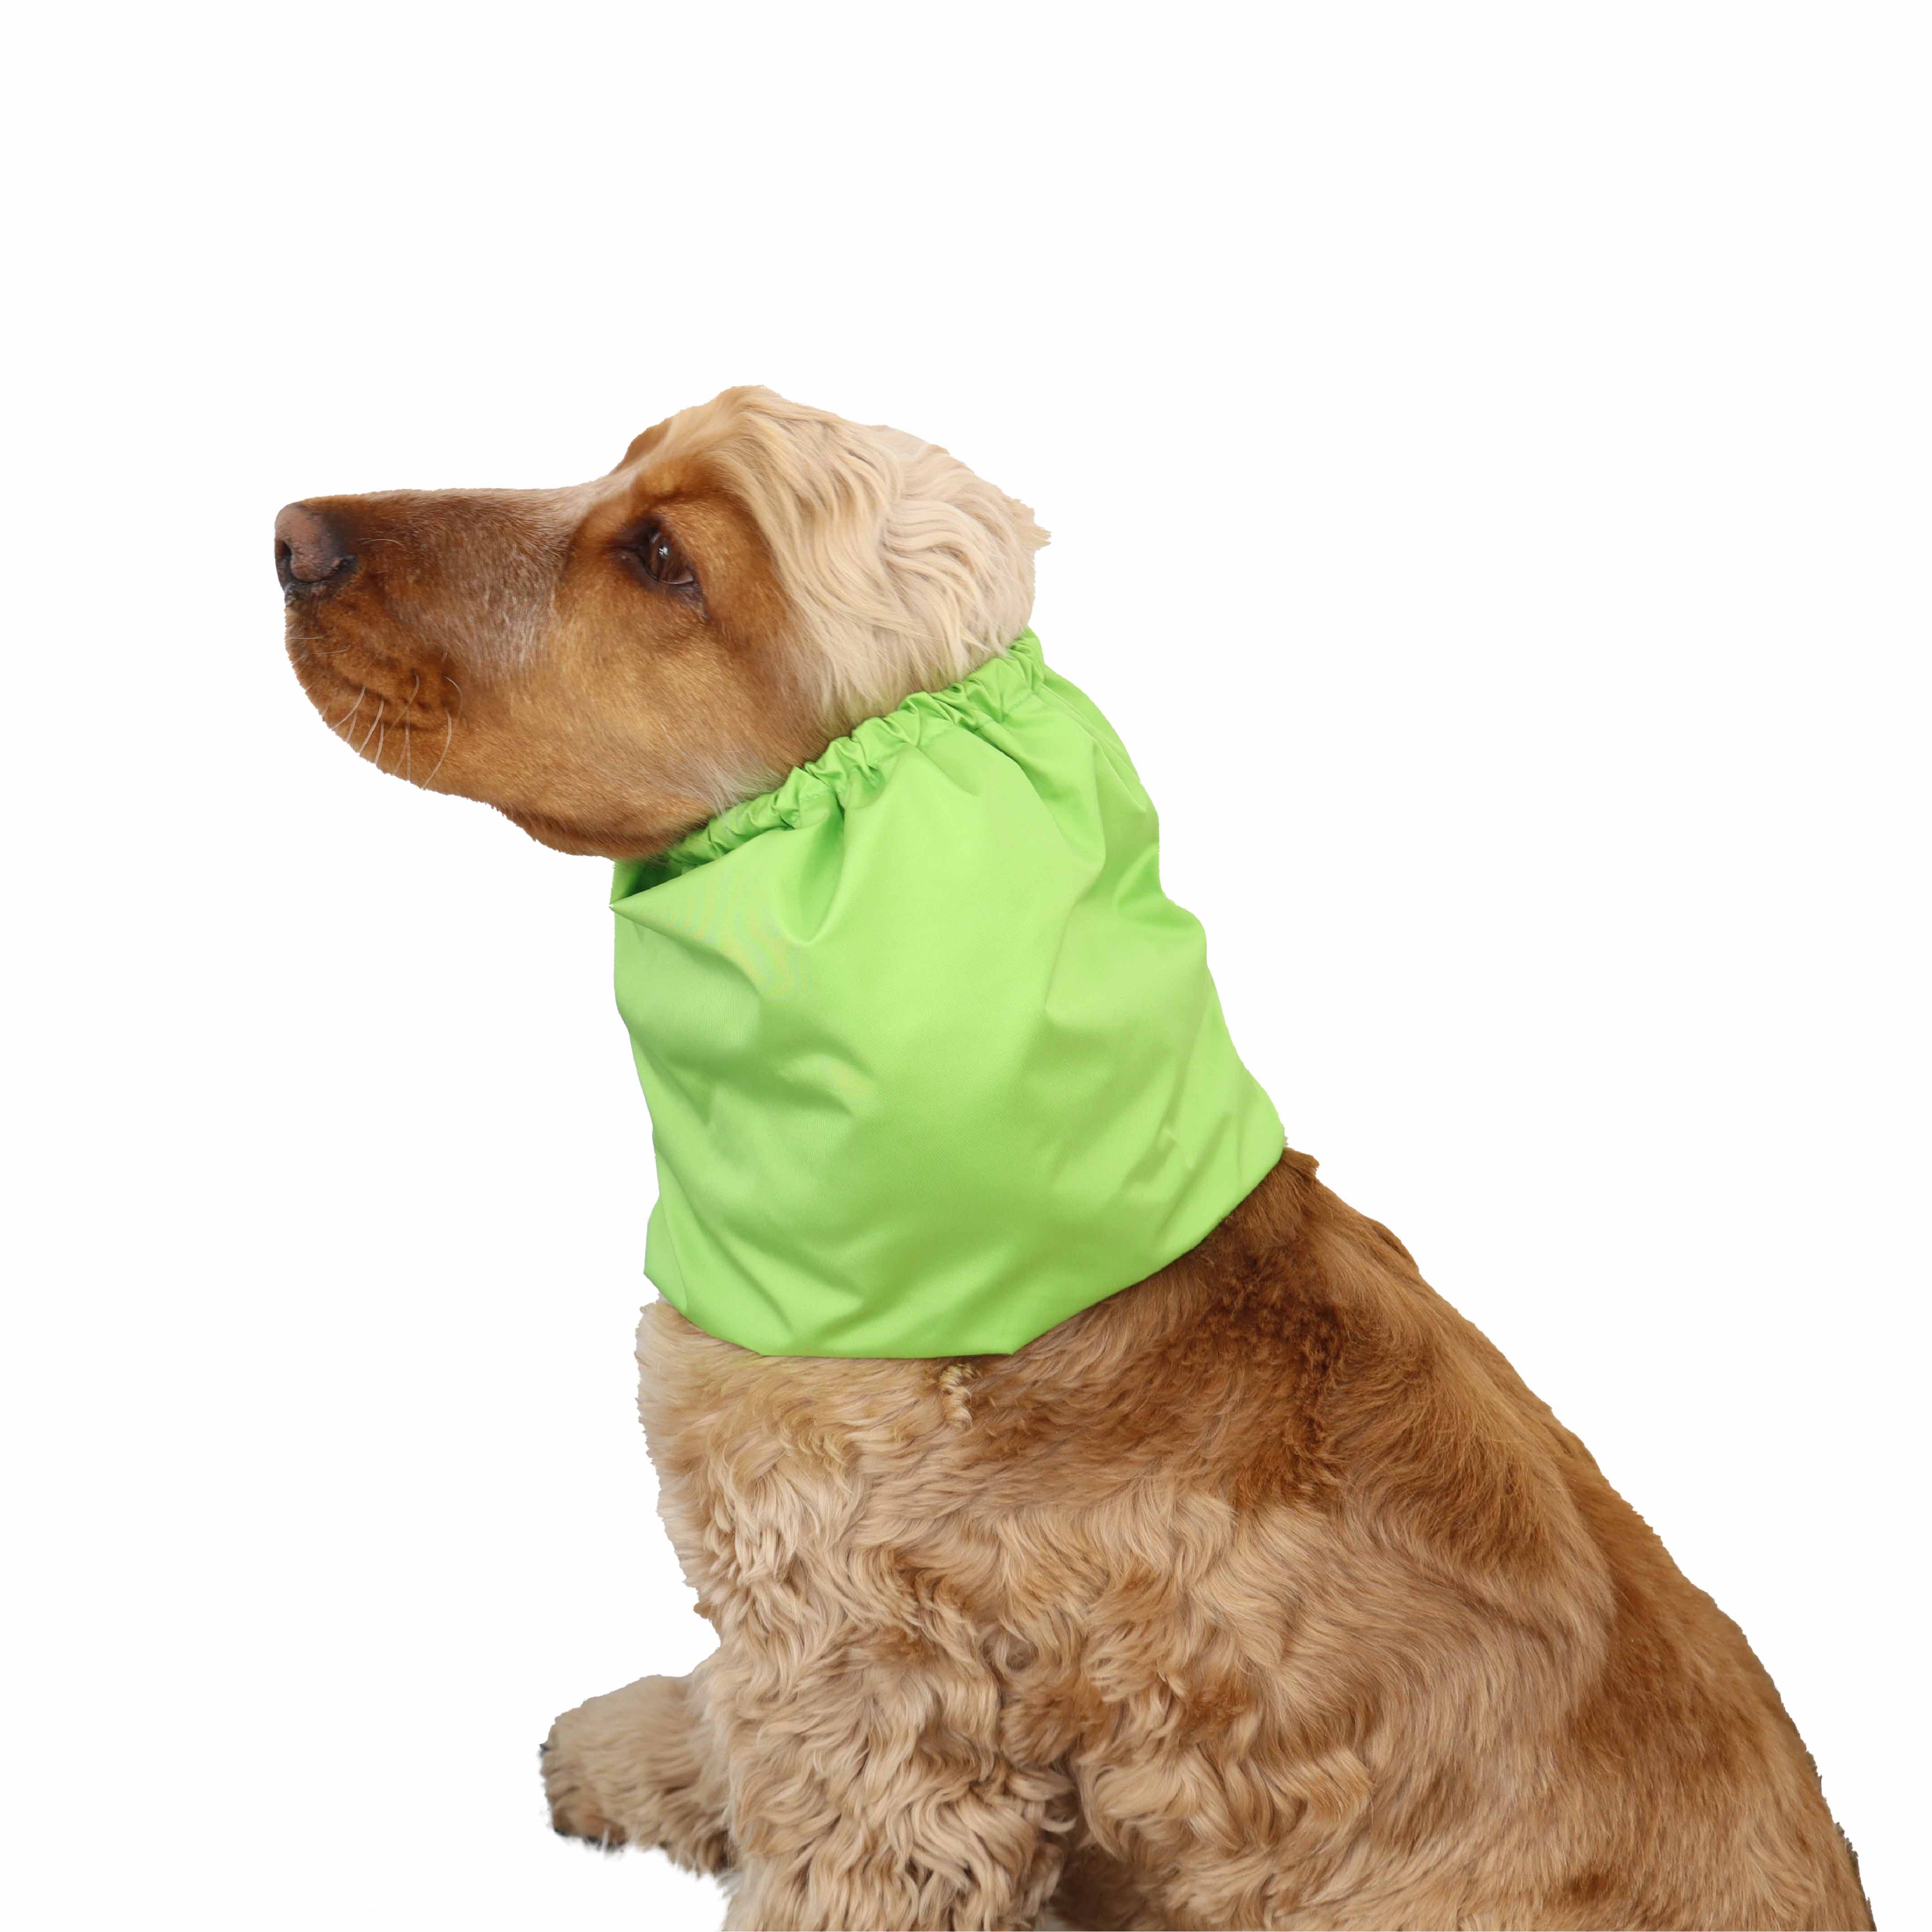 Spaniel with green dog snood by Distinguish Me